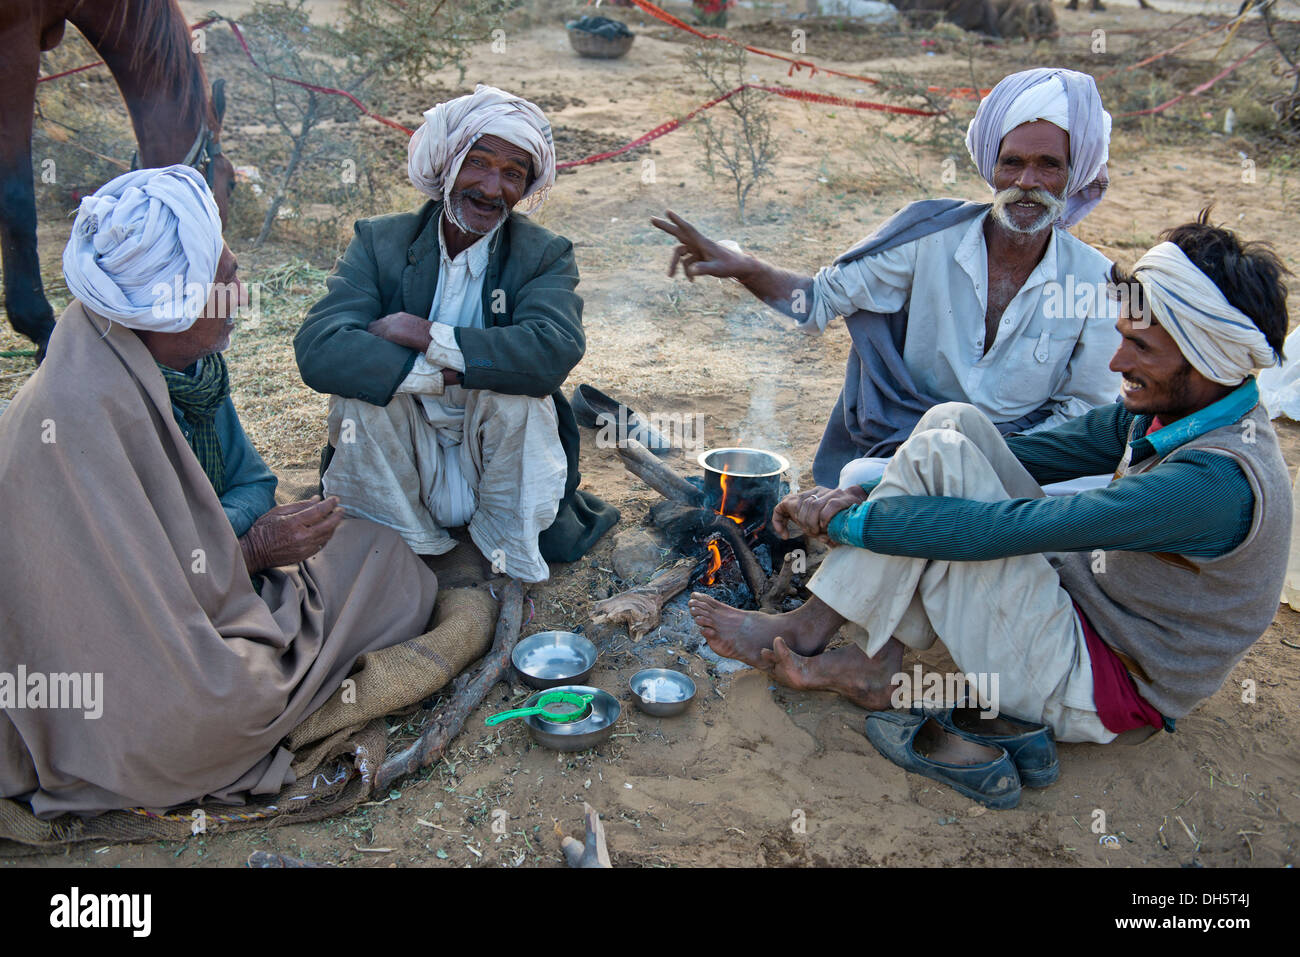 Four Indian men in turbans sitting on the ground having a conversation, milk tea is being prepared over an open fire Stock Photo